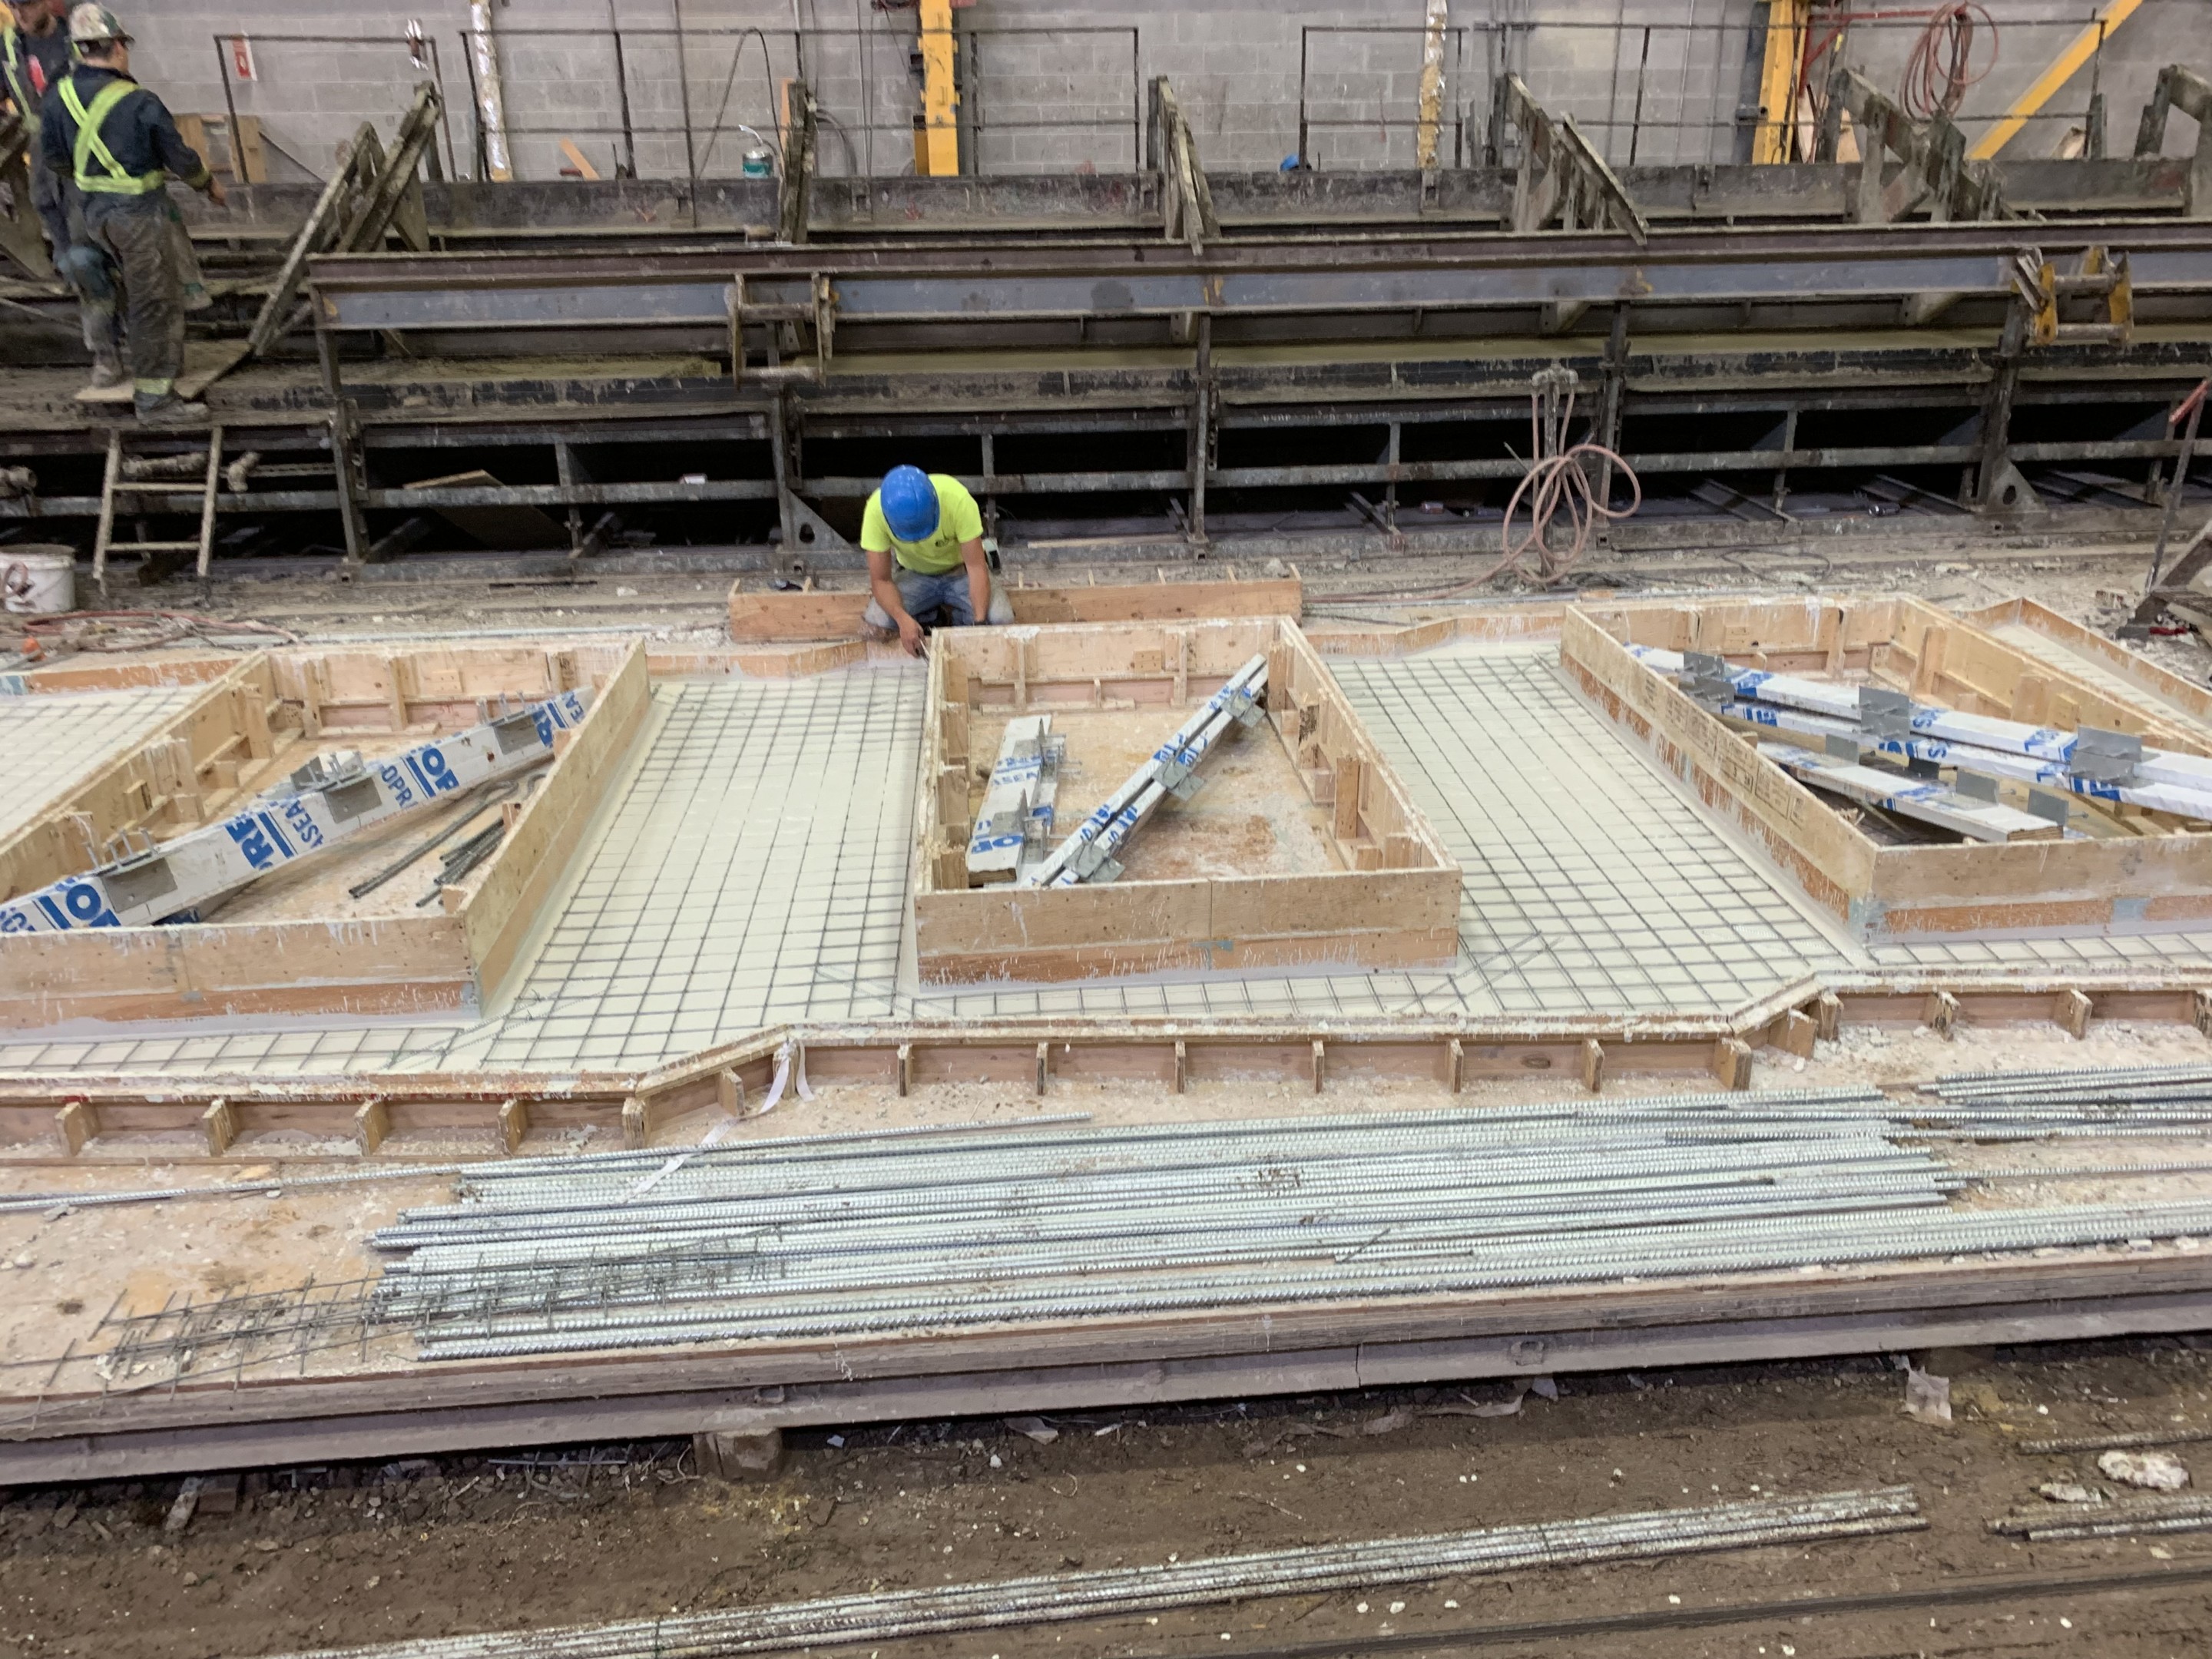 Image of the concrete panels during fabrication